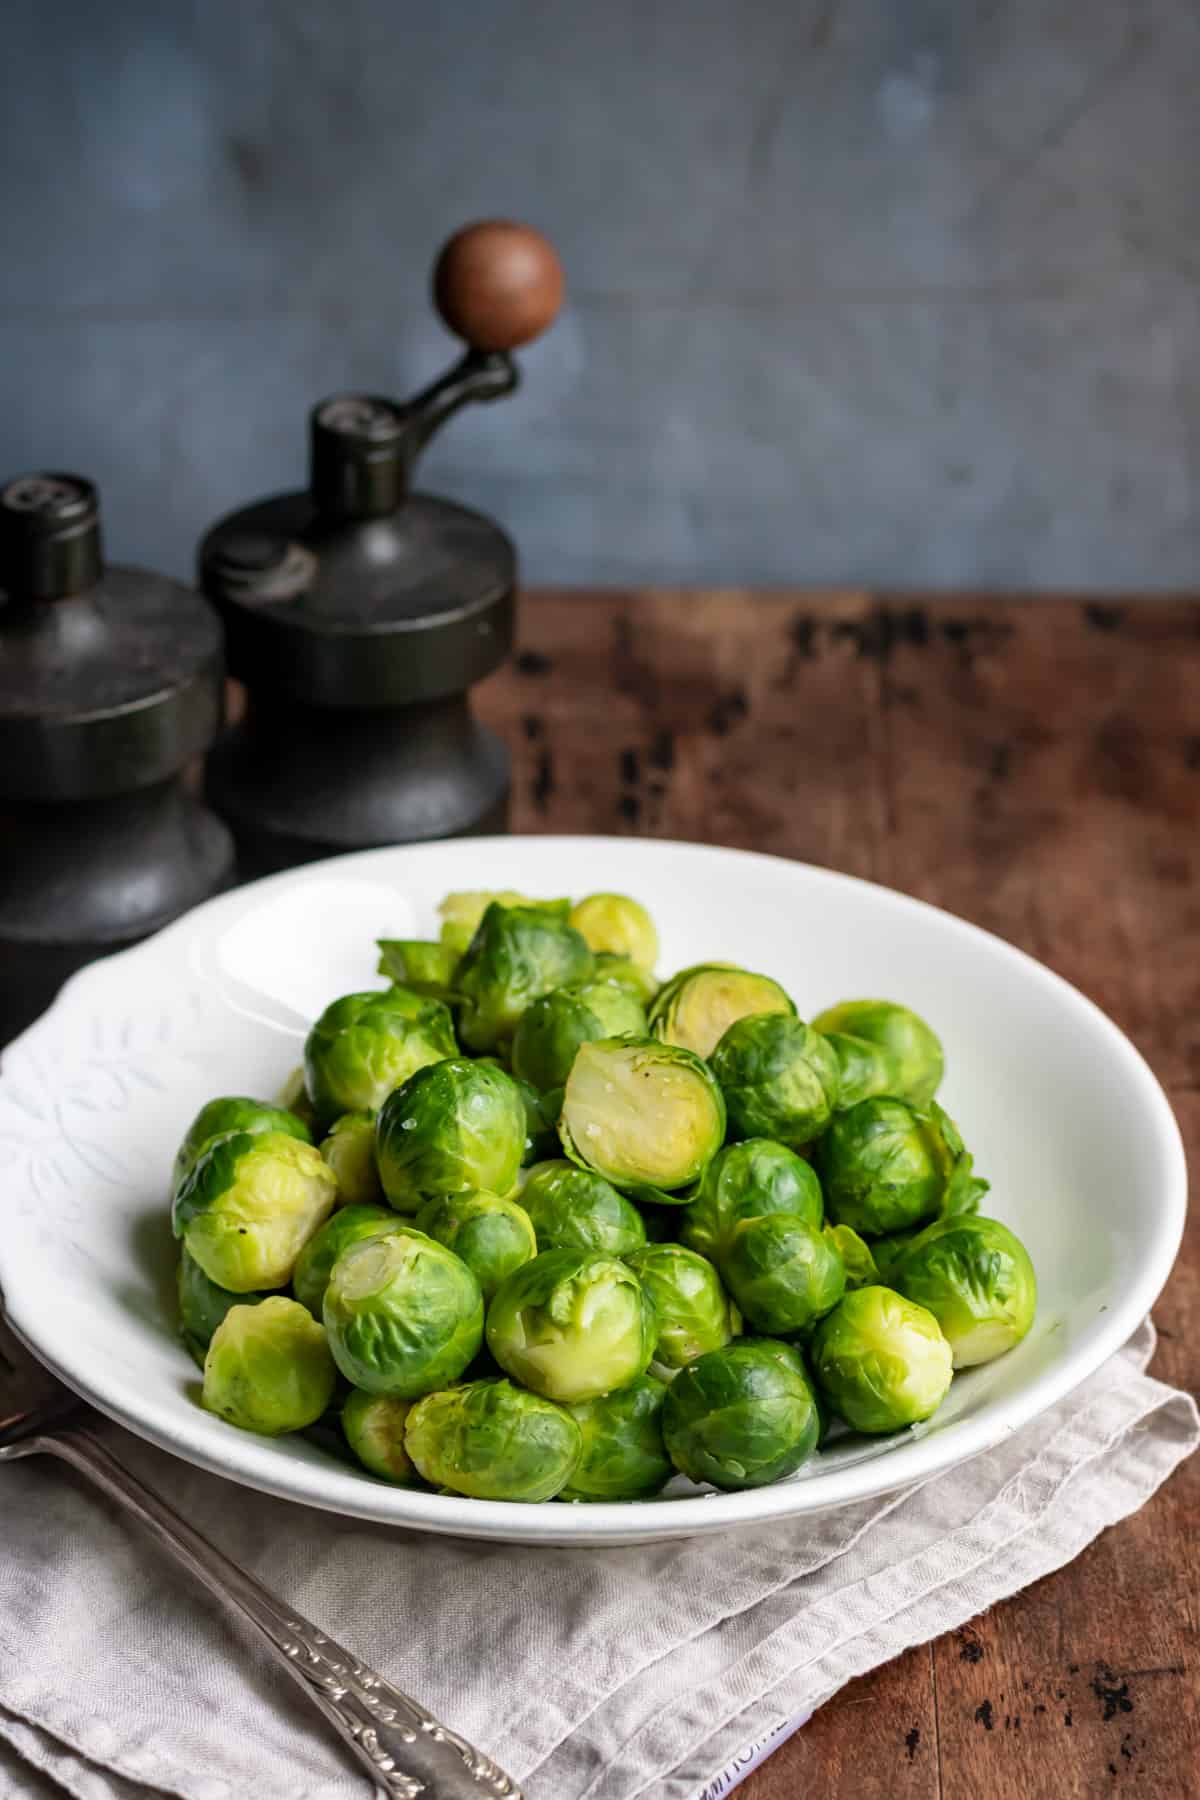 Serving dish of microwaved brussels sprouts on a table.